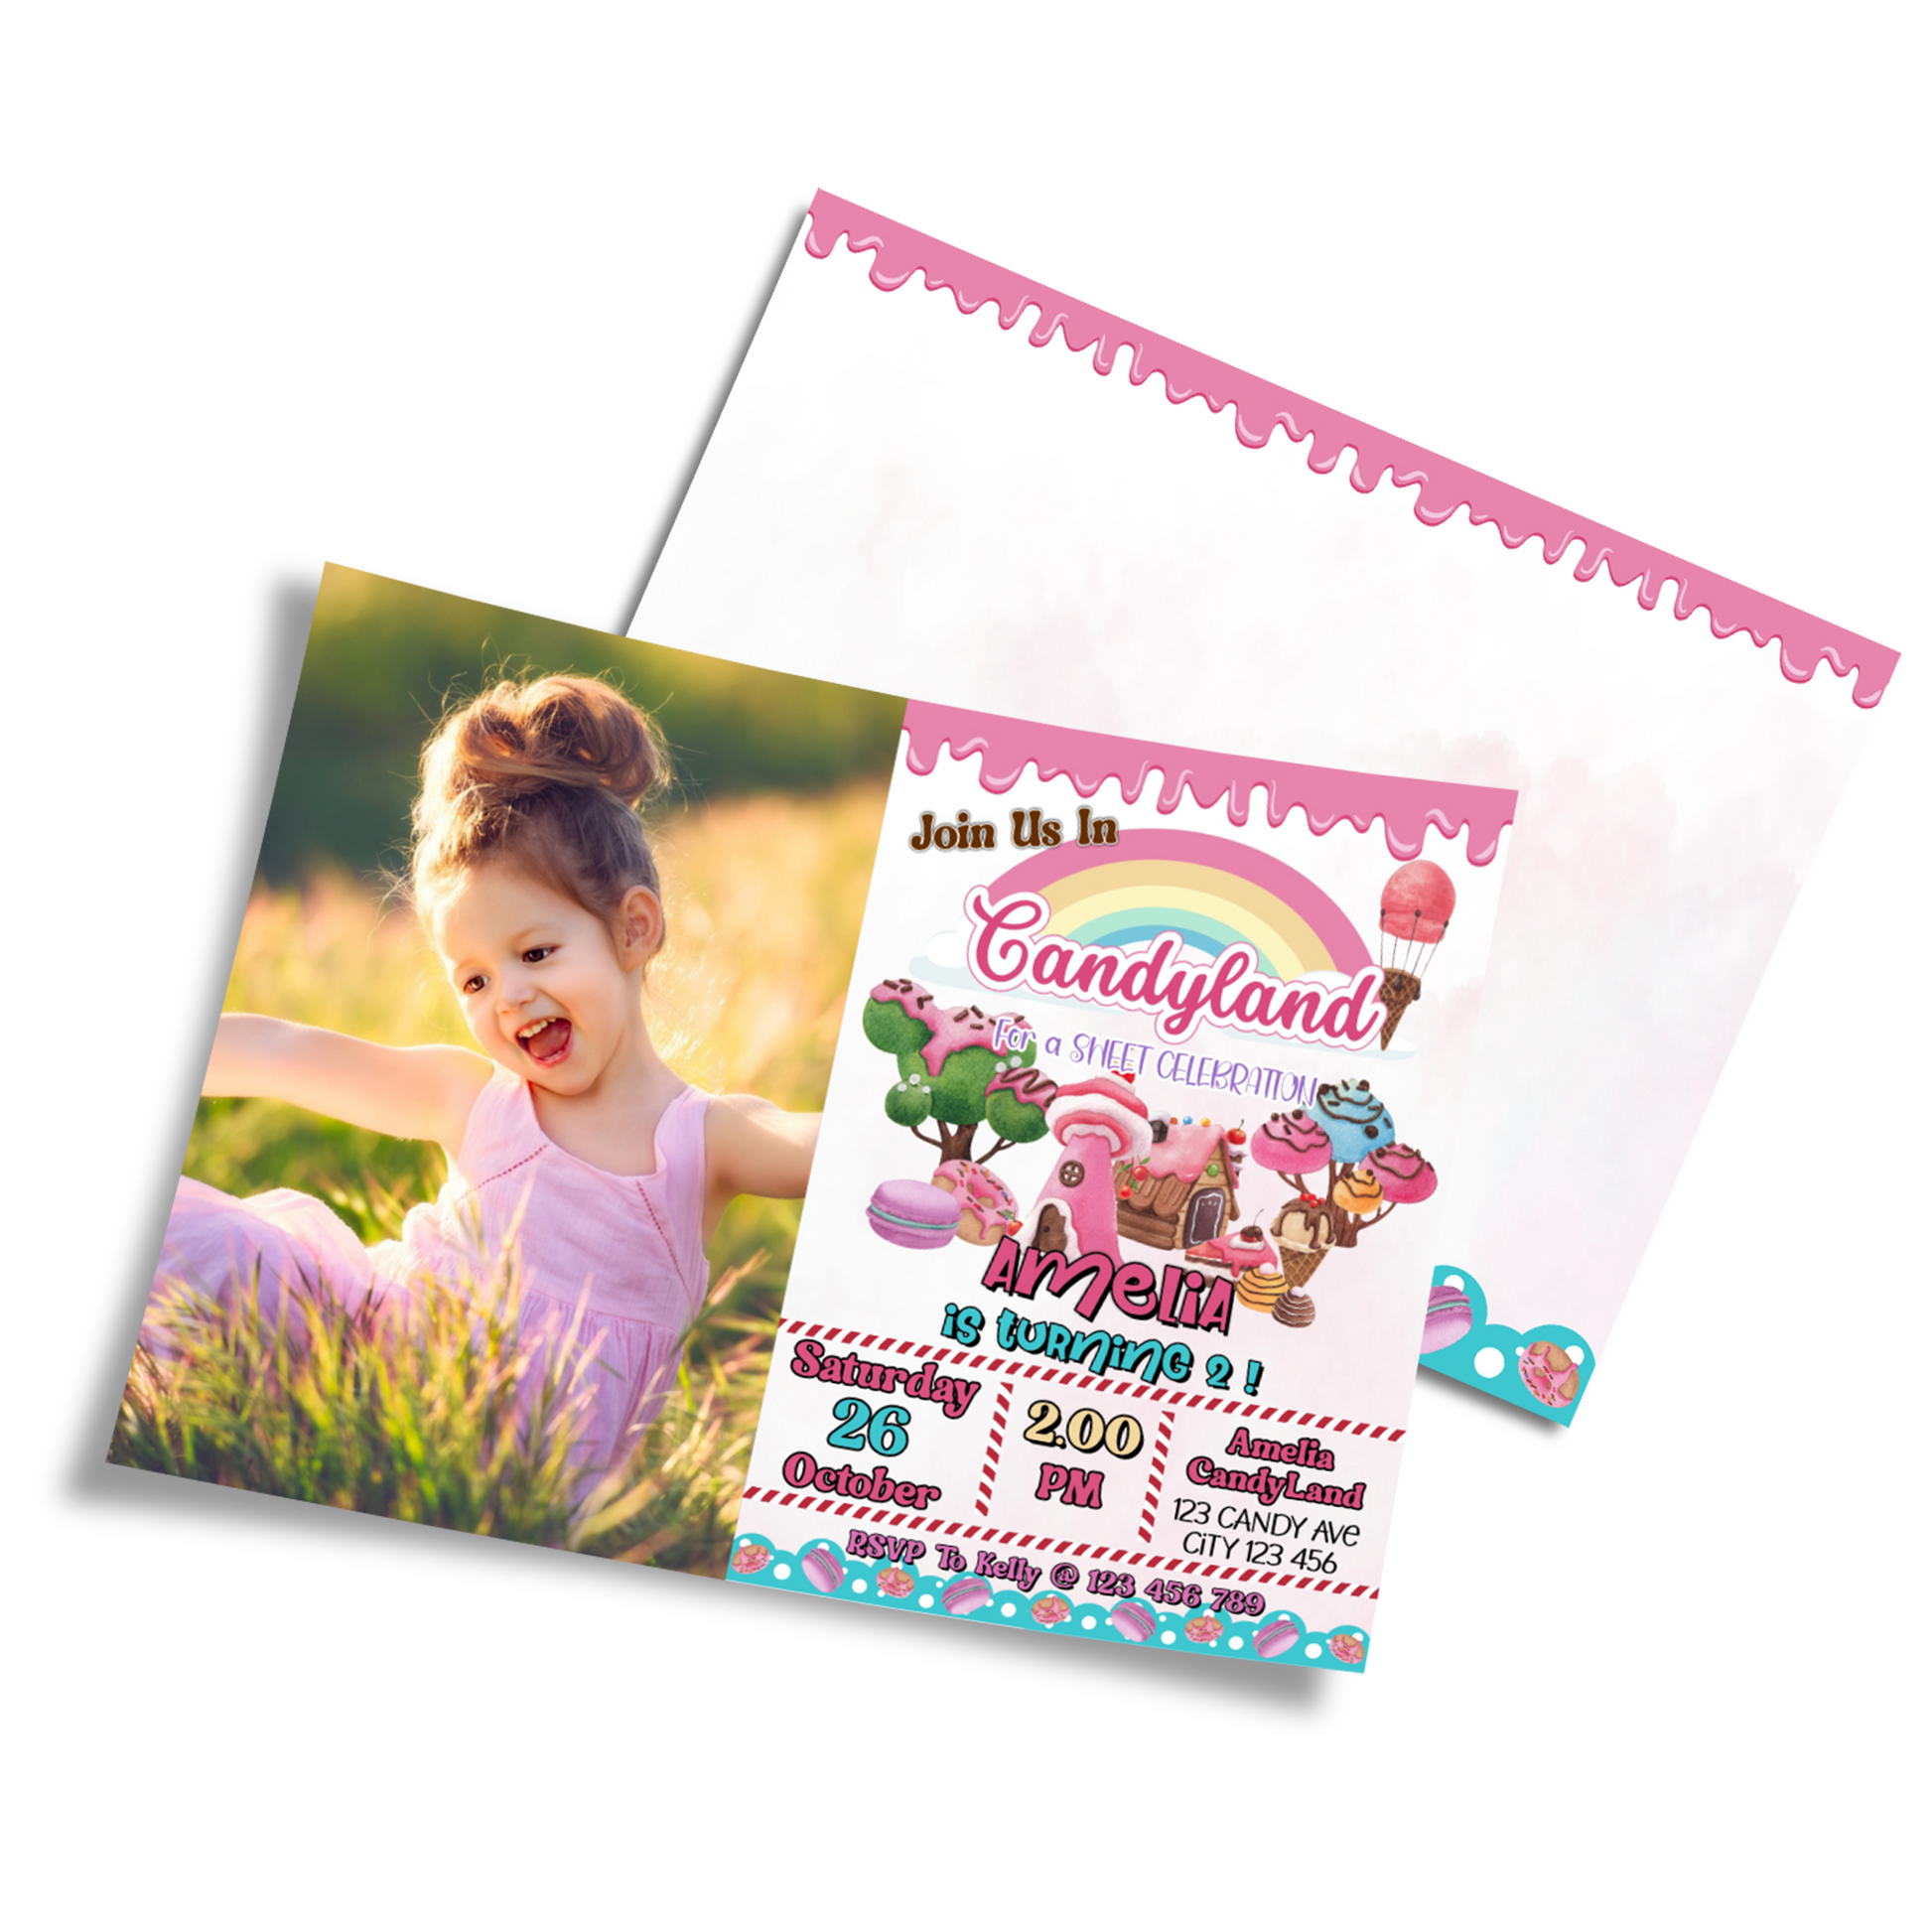 Personalized photo card invitations with a Candy Land theme